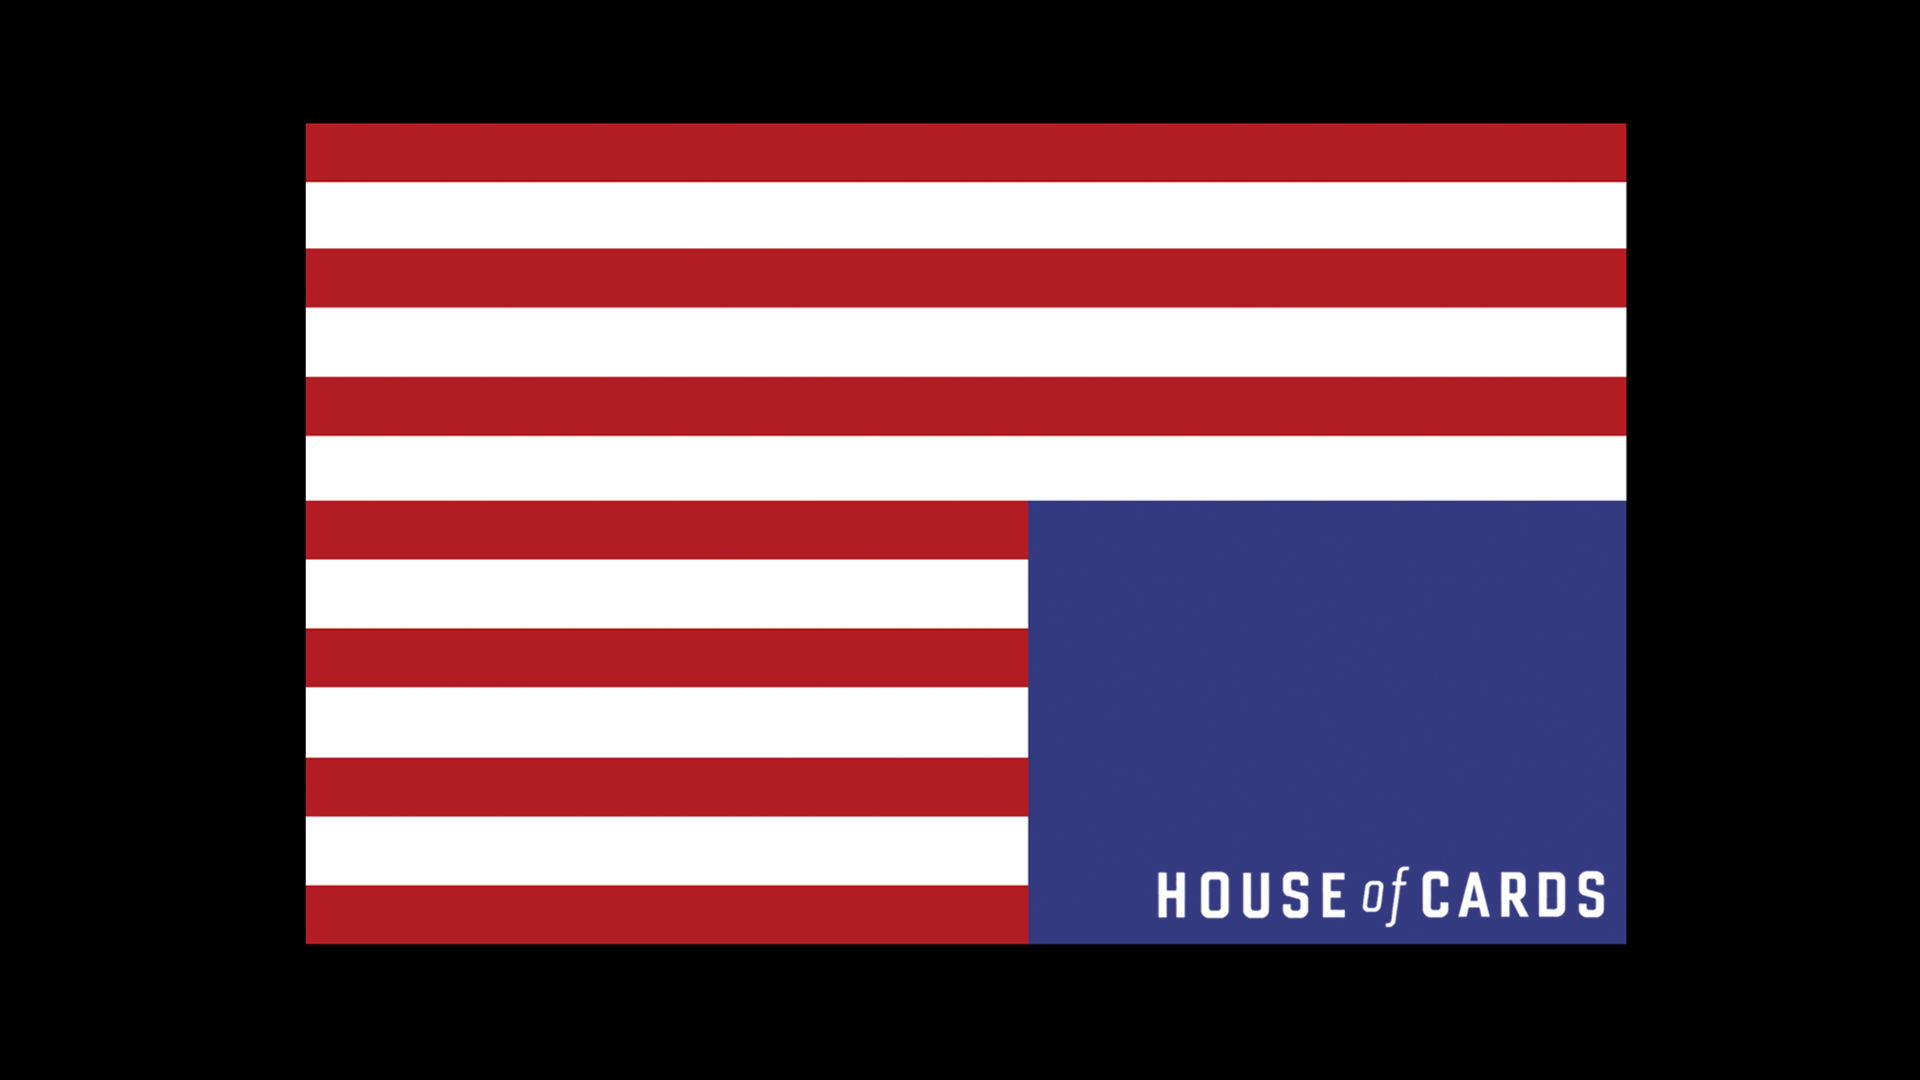 Minimalistic House of Cards Wallpapers : HouseOfCards